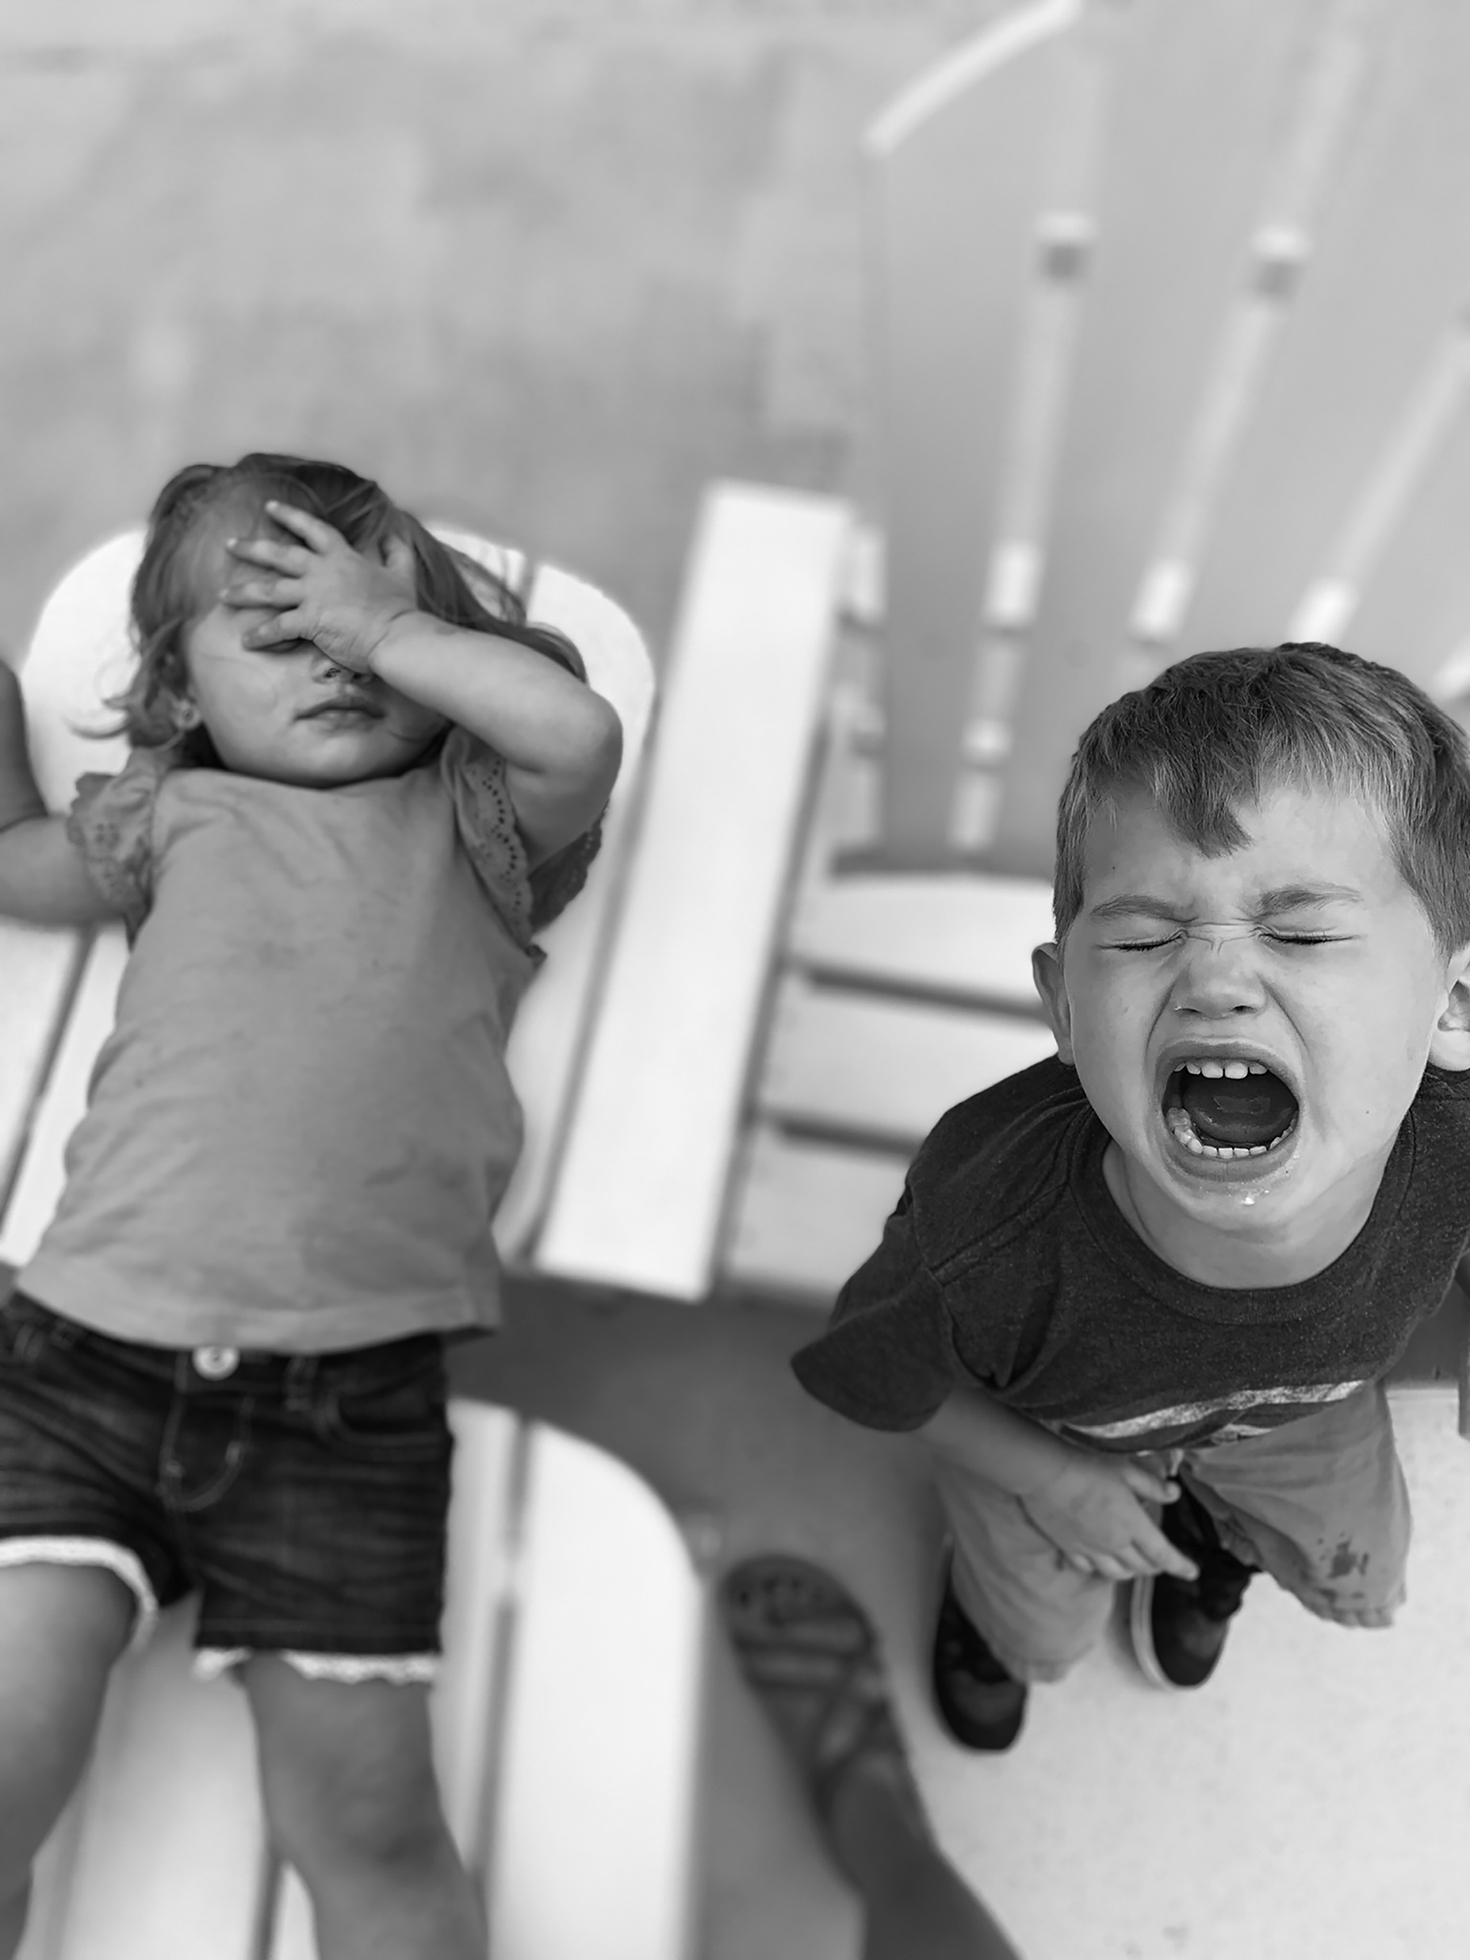 A young girl lays back on an outdoor chair with one hand over her exasperated face as a young boy stands next to her crying loudly from the looks of it, and in between them, one adult woman’s sandaled foot adds context.